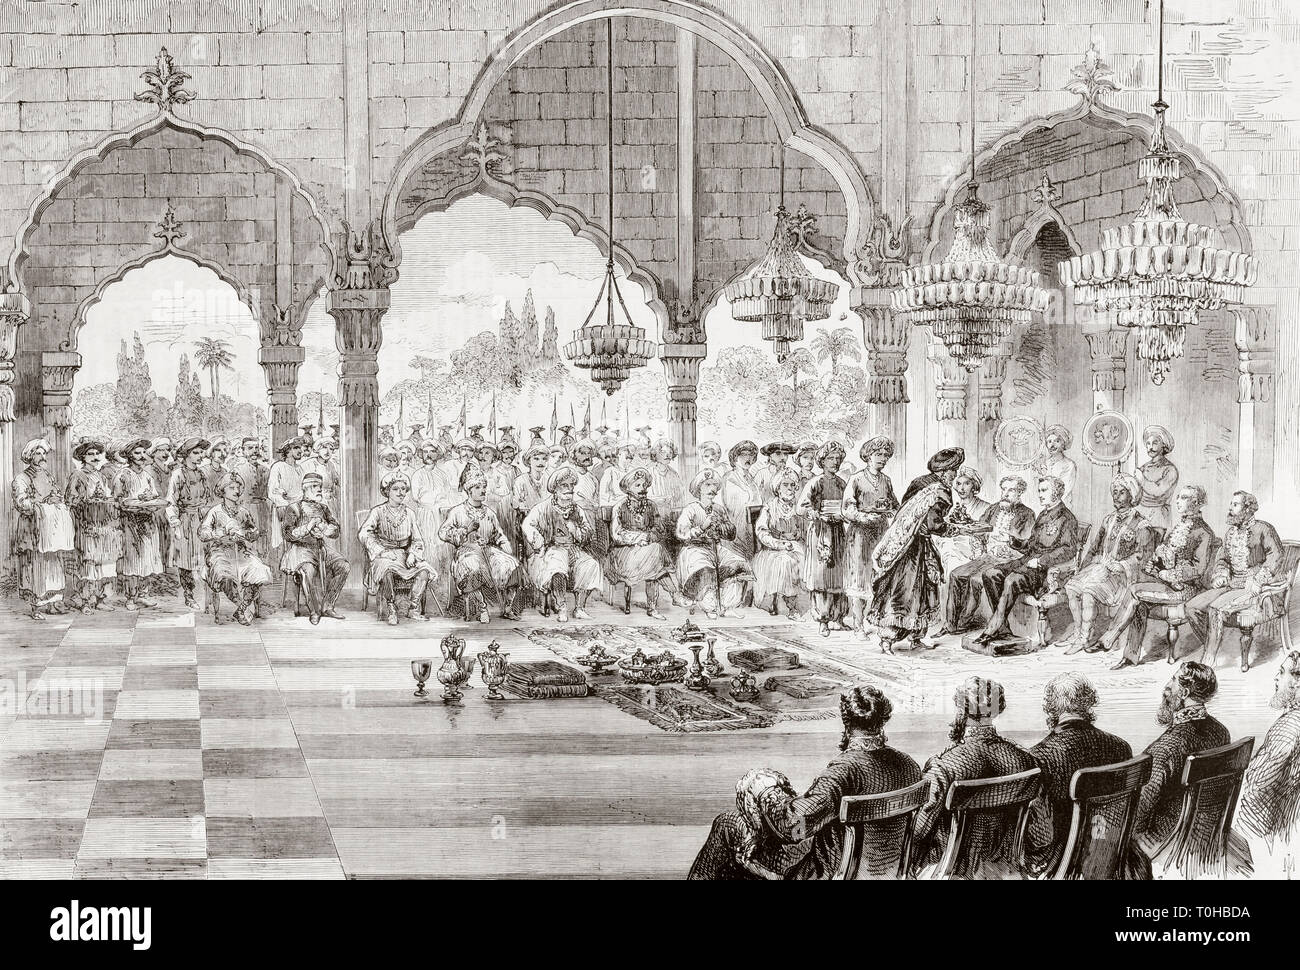 Reception for Governor General of India by Rajah of Lucknow in 1868 old vintage 1800s engraving Indian Stock Photo